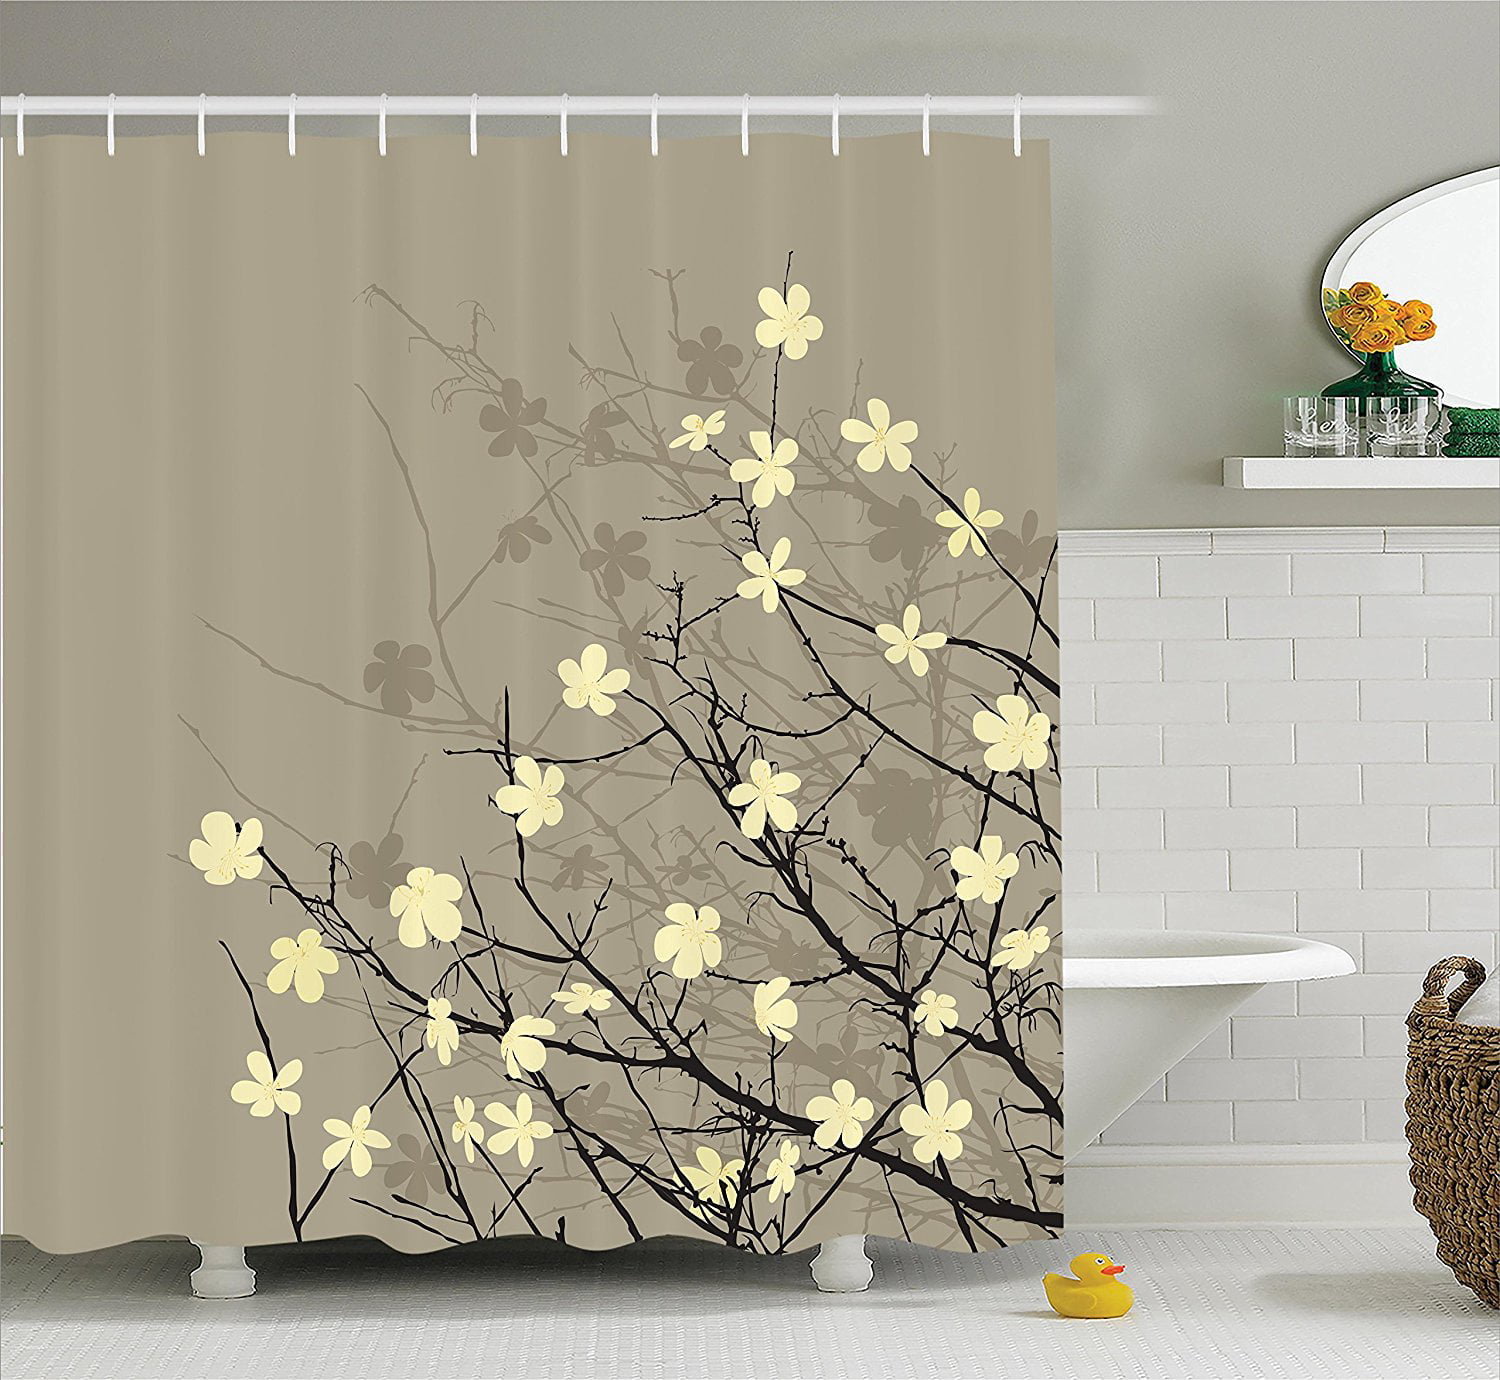 Details about   Fantasy Mushrooms and Fruits Painting Shower Curtain Bathroom Waterproof 12Hooks 